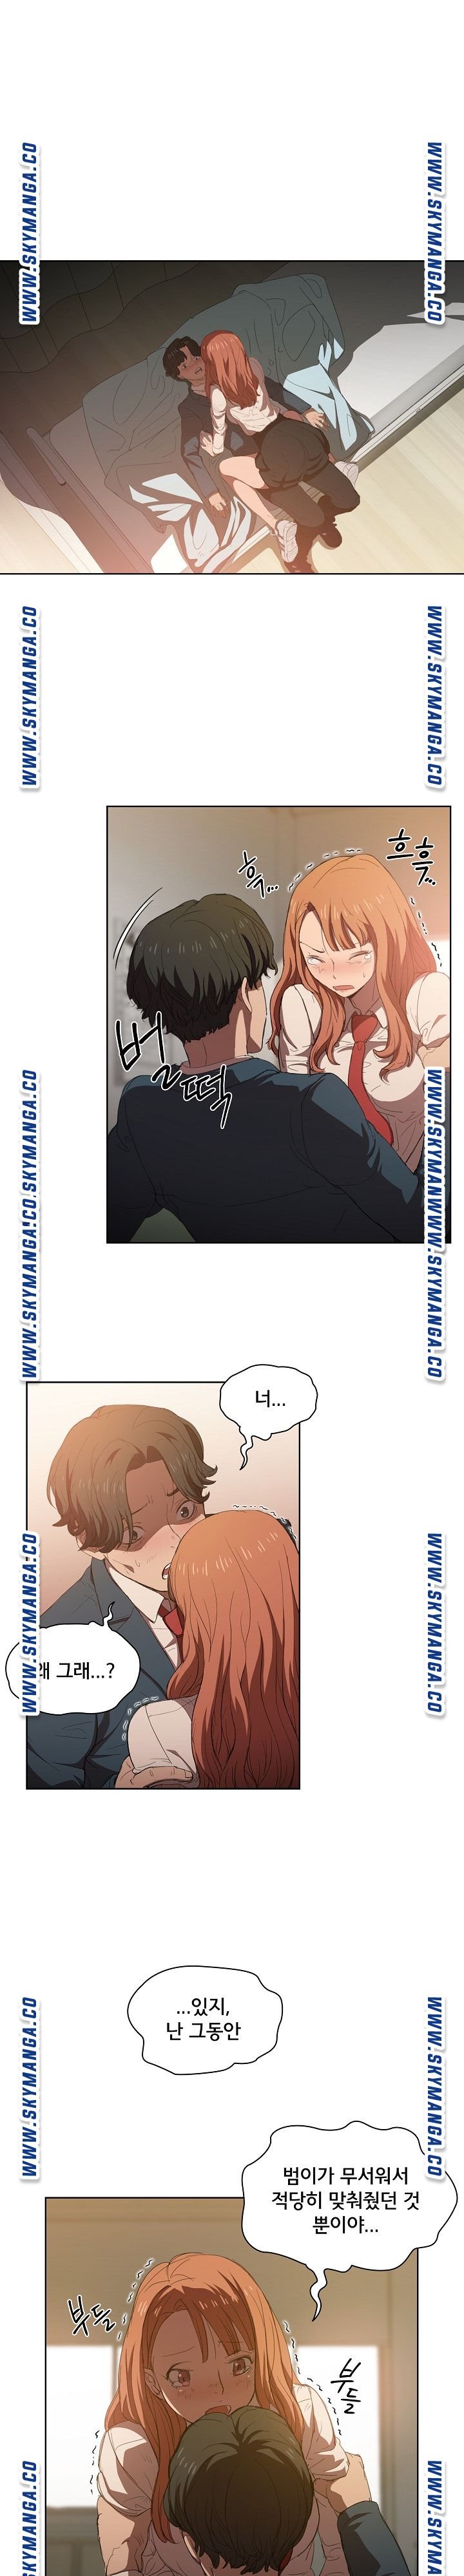 how-about-getting-lost-raw-chap-3-2